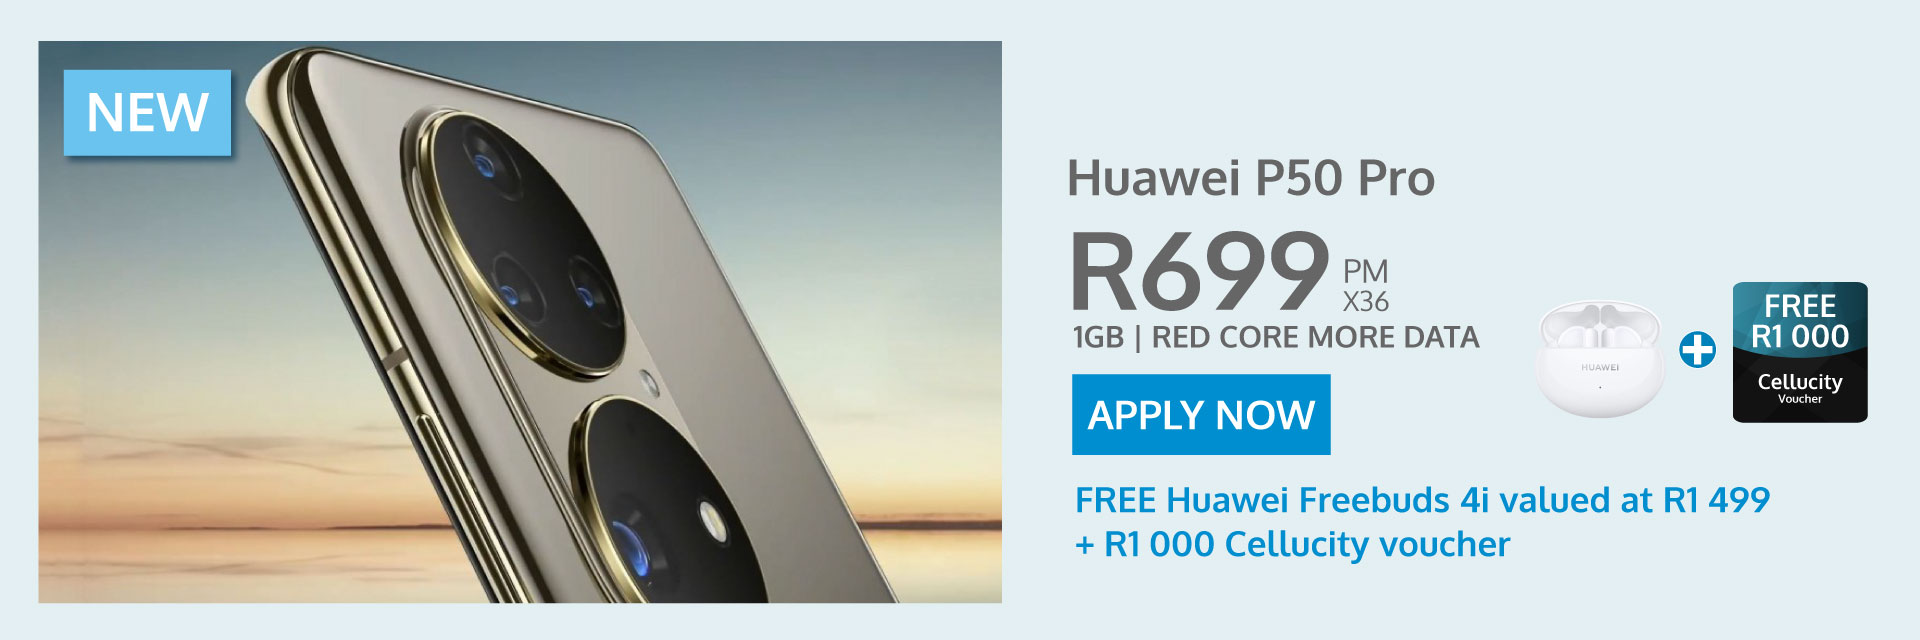 Huawei P50 Pro contract deal banner